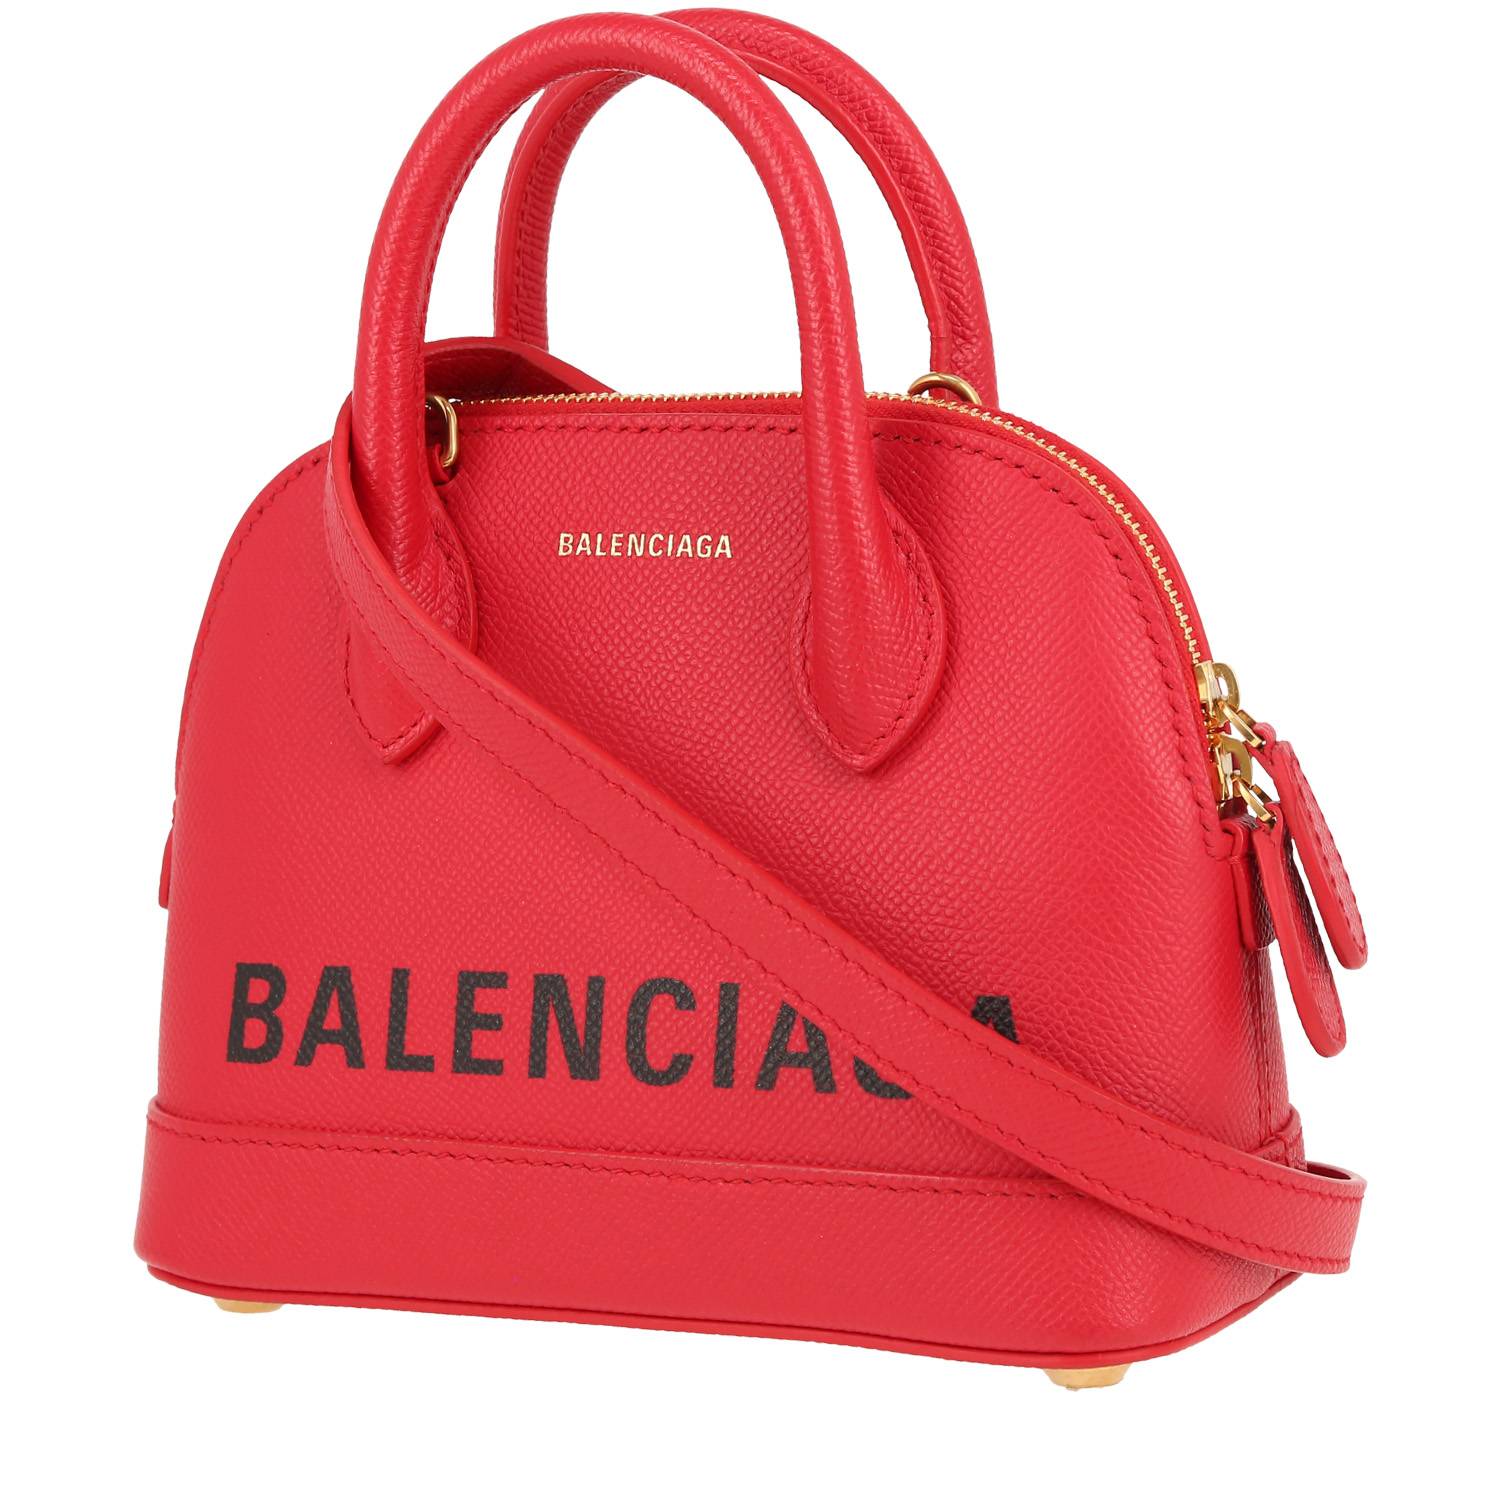 Balenciaga Ville Top Handle mini shoulder bag in red grained leather